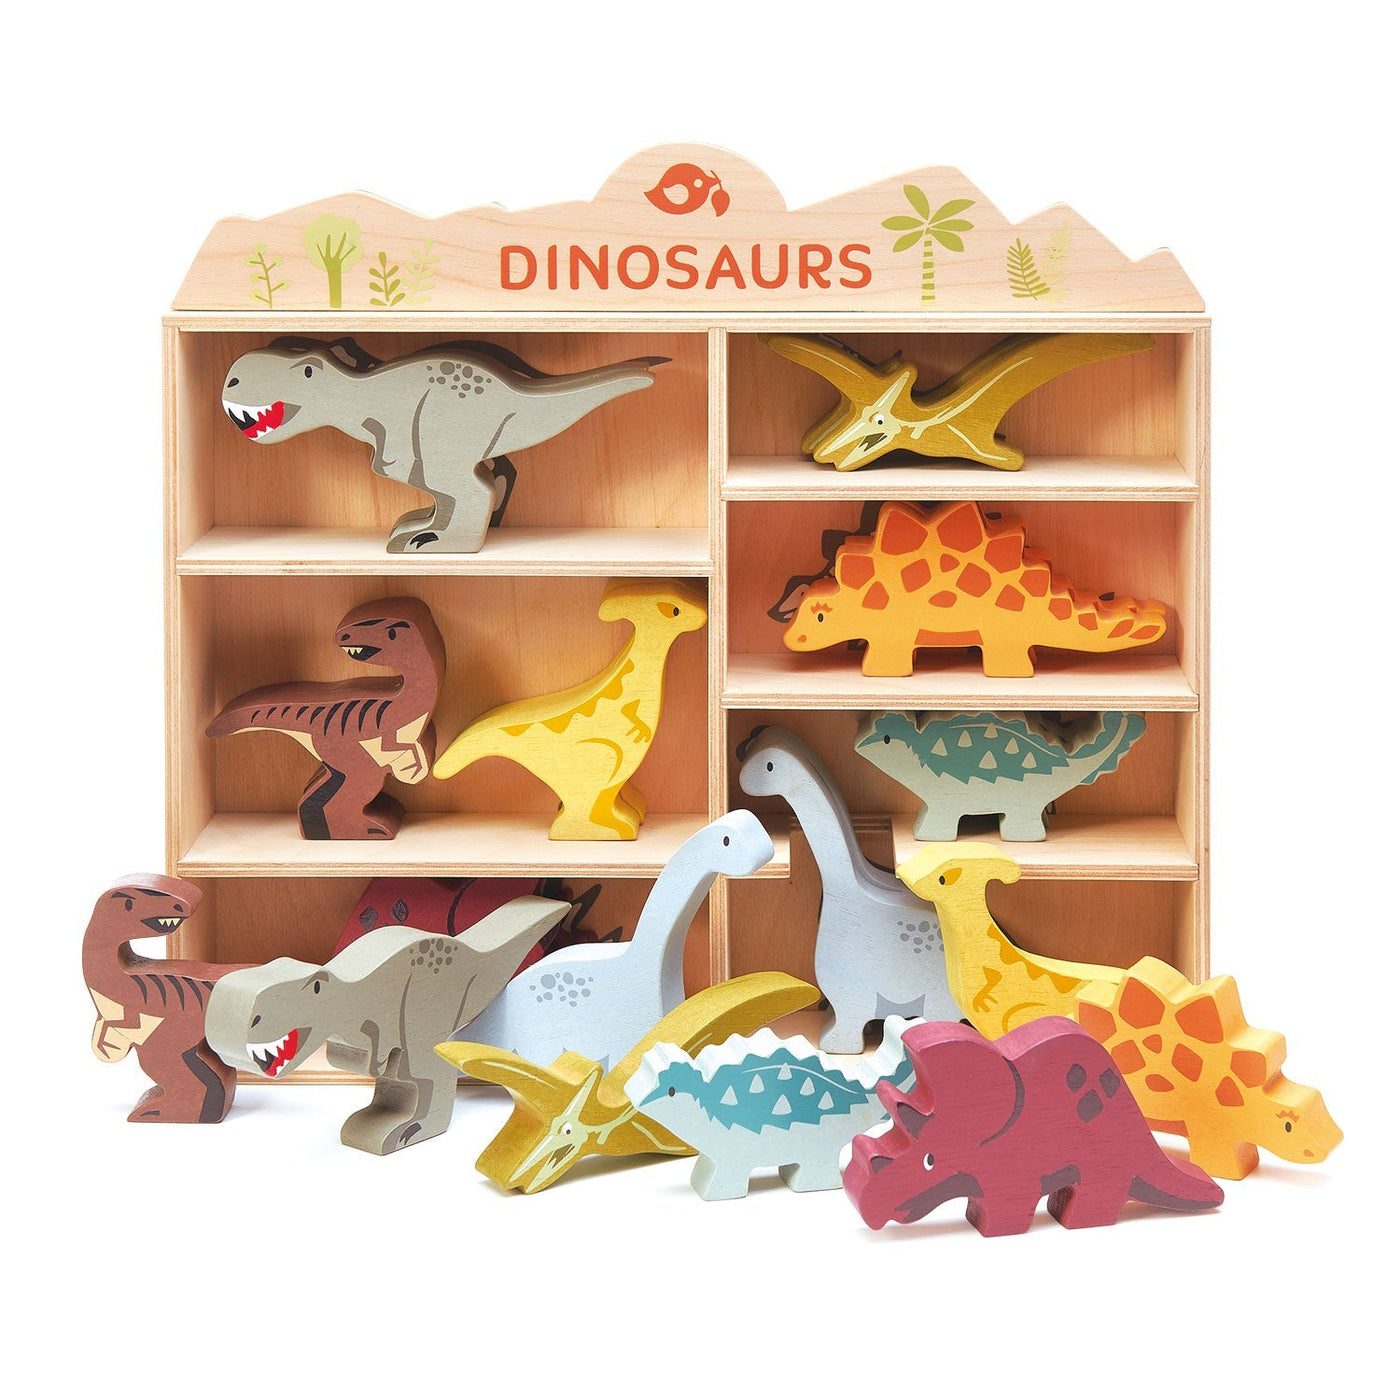 Dinosaurs - 3 of each piece in a display stand